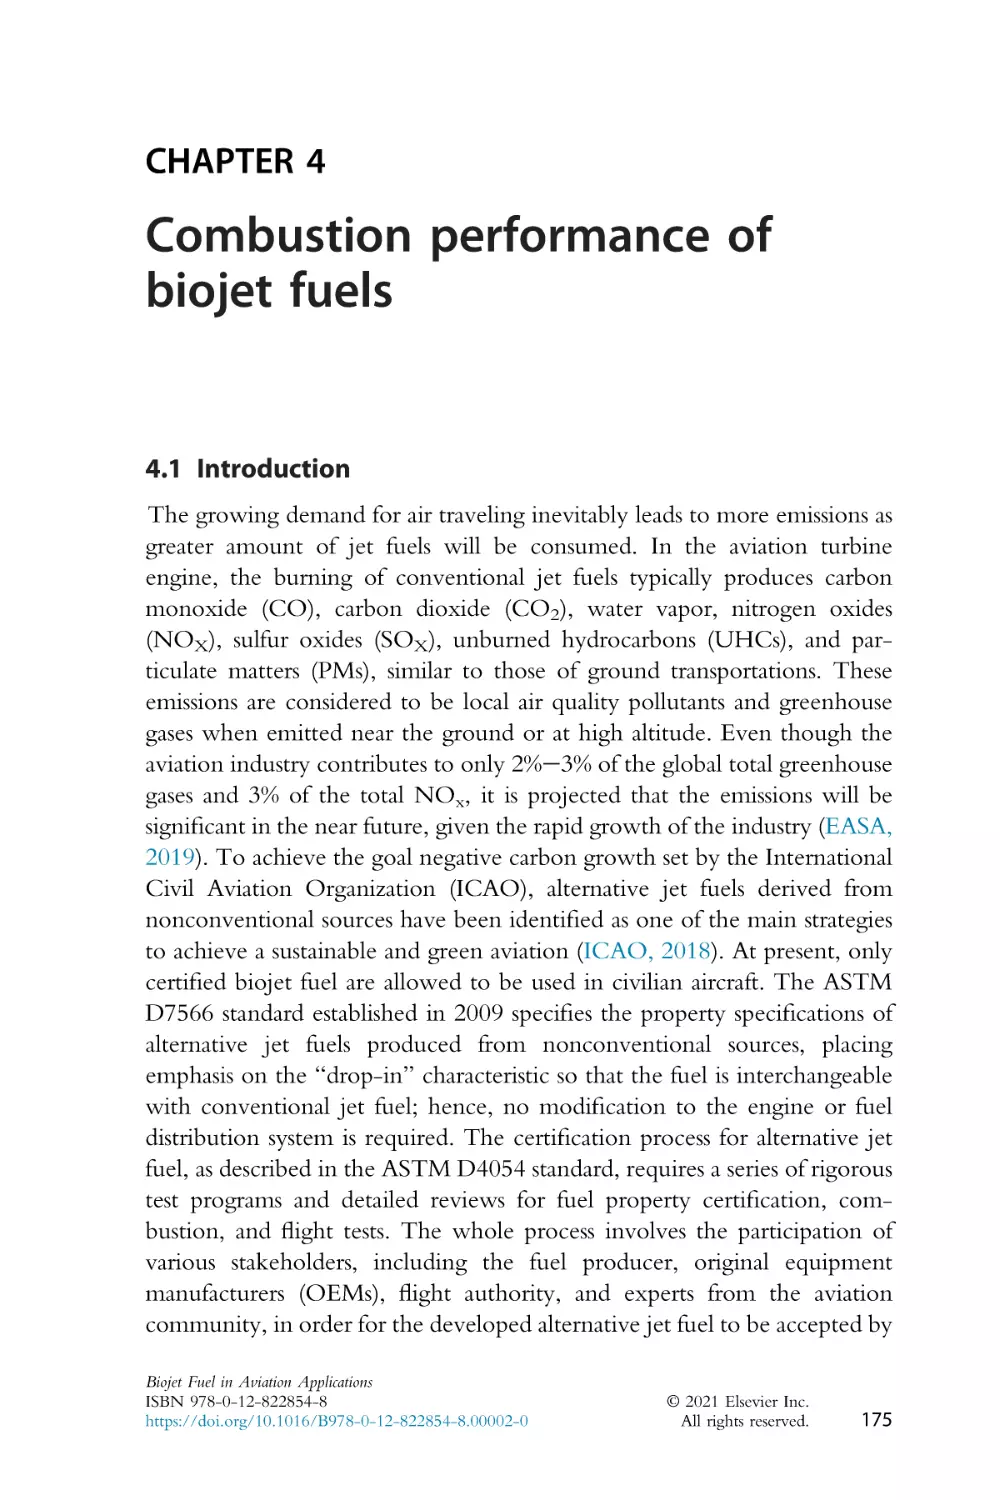 4 - Combustion performance of biojet fuels
4.1 Introduction